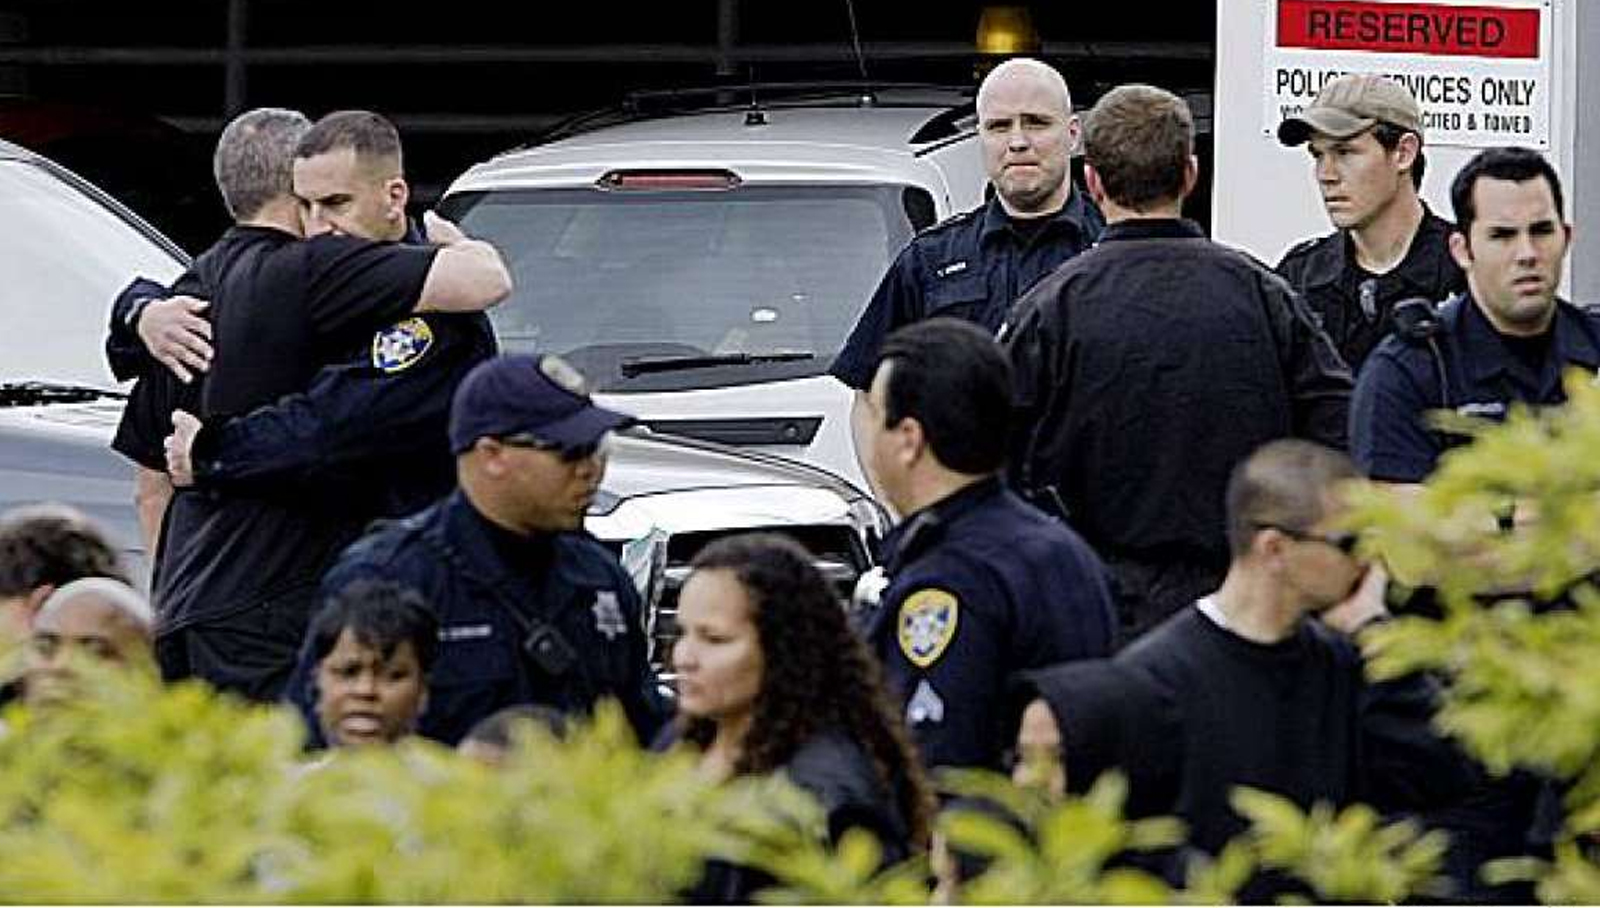 Four police officers are shot and killed and a fifth is wounded in two shootings at Oakland, California.